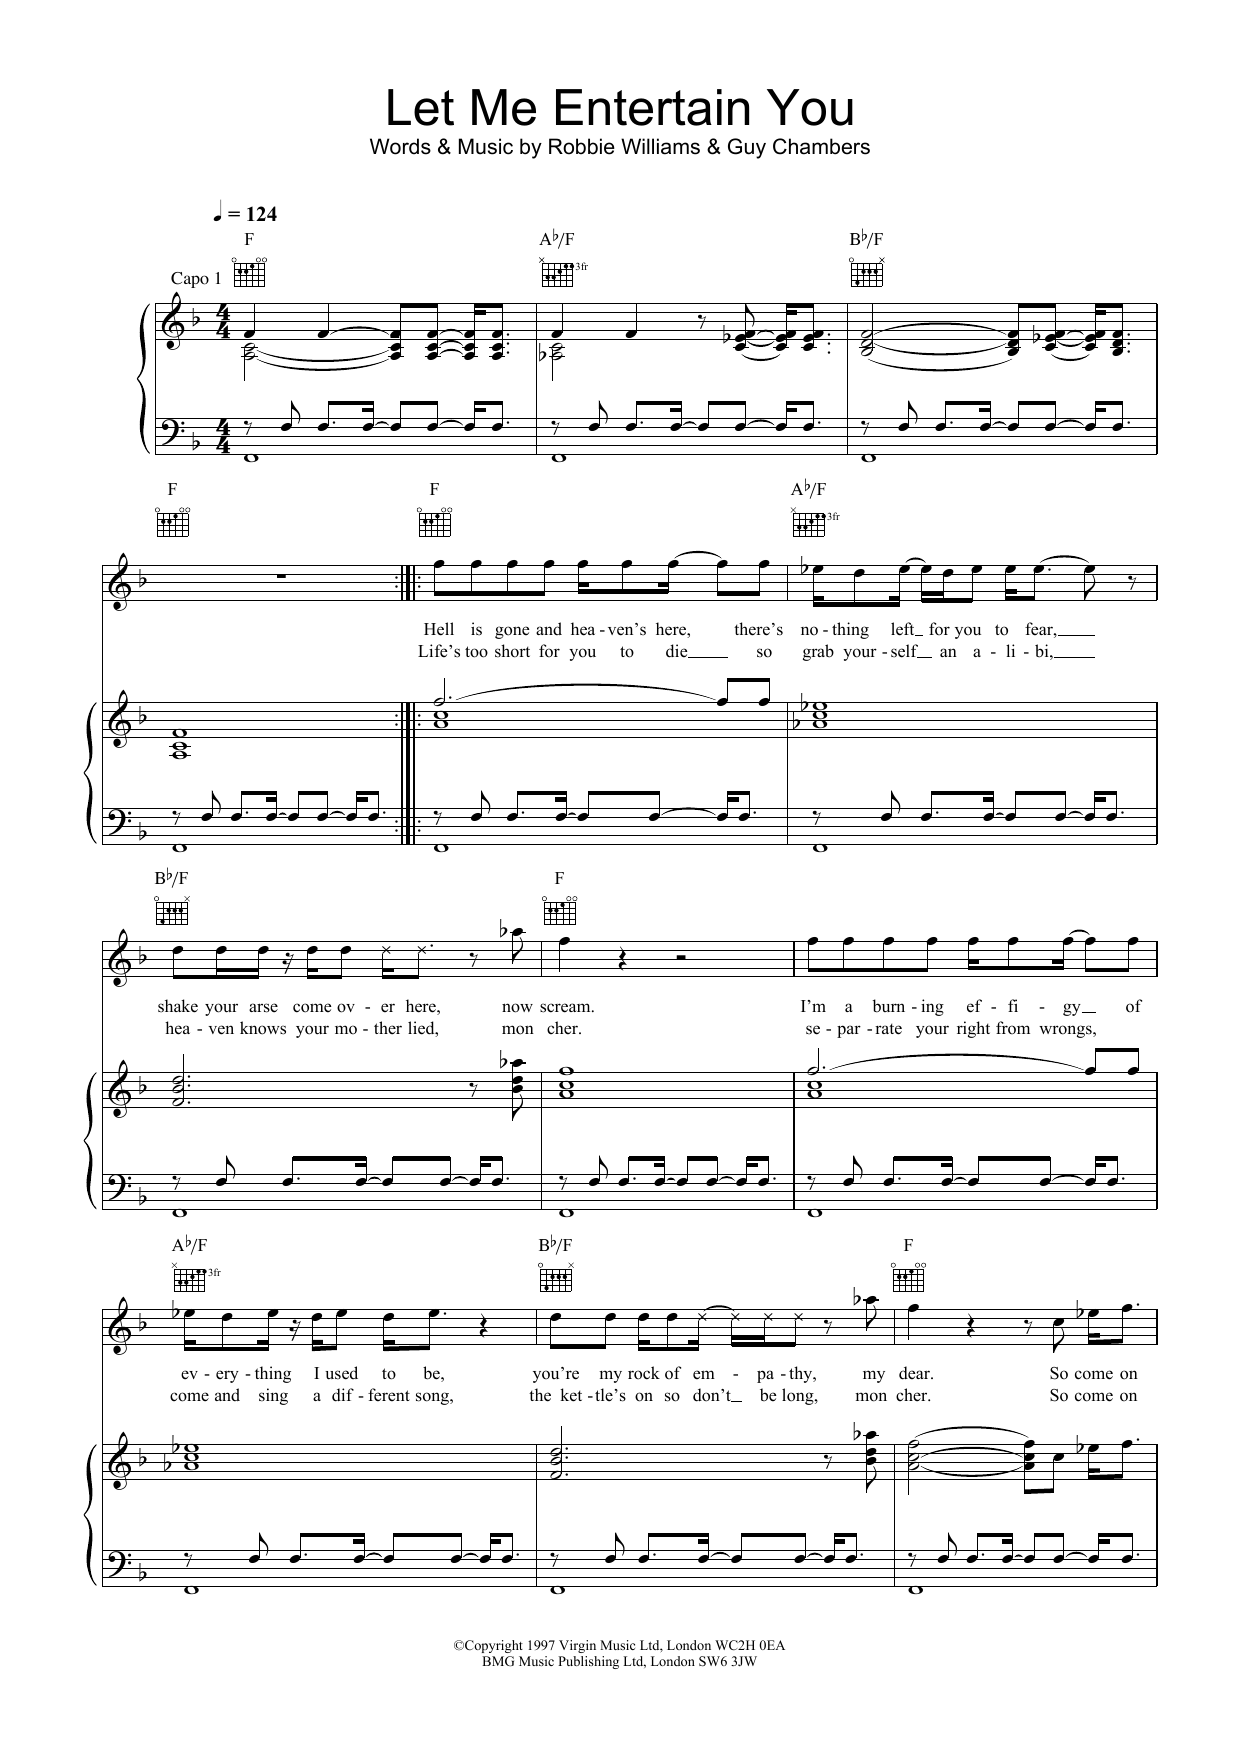 Robbie Williams Let Me Entertain You sheet music notes and chords. Download Printable PDF.